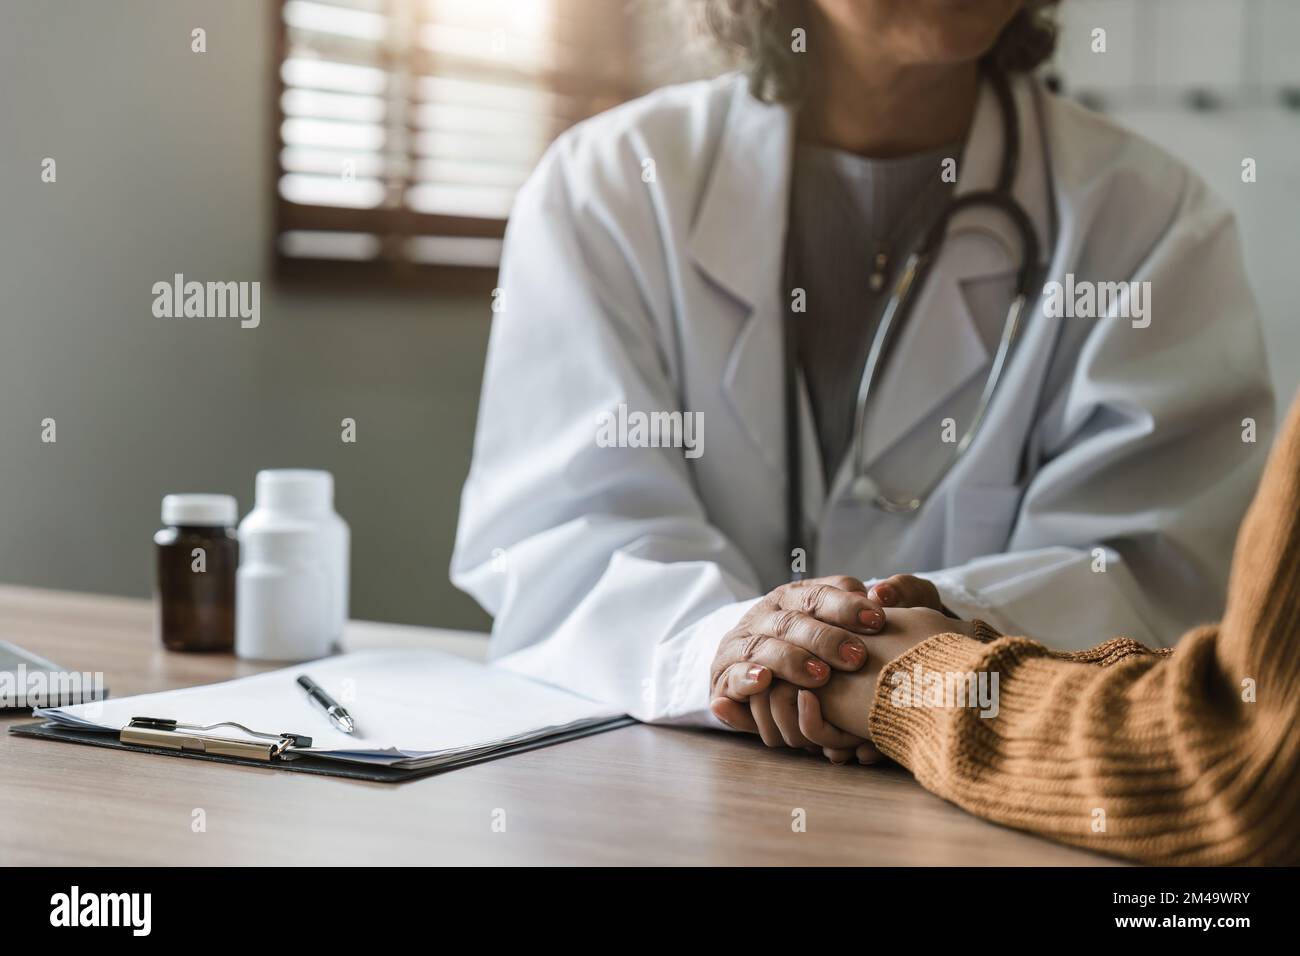 Close up doctor hold hand of patient give comfort, express health care sympathy, medical help trust support encourage reassure infertile patient at Stock Photo